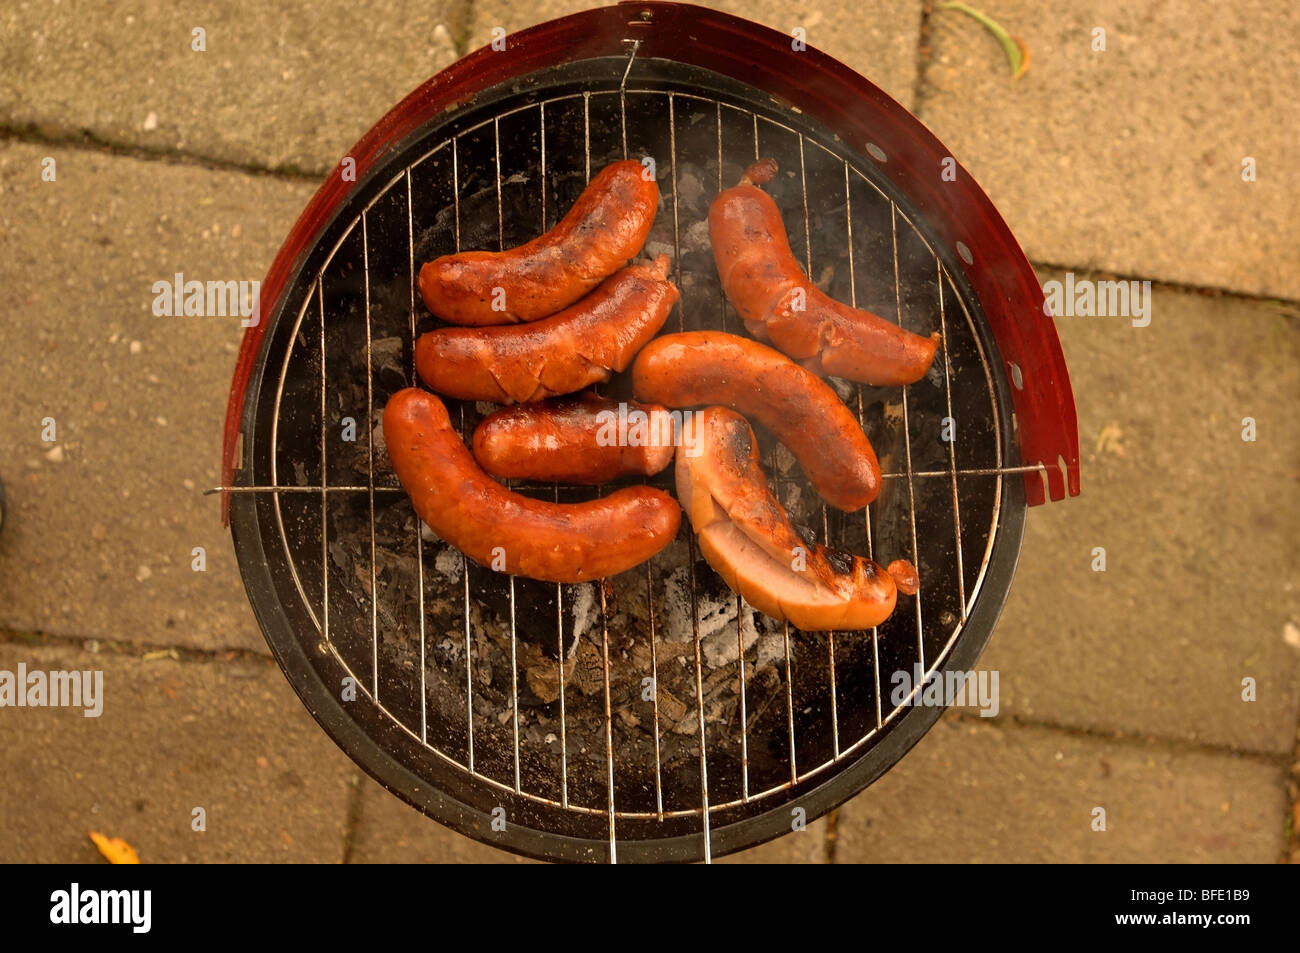 Polish sausages on a small grill. Stock Photo